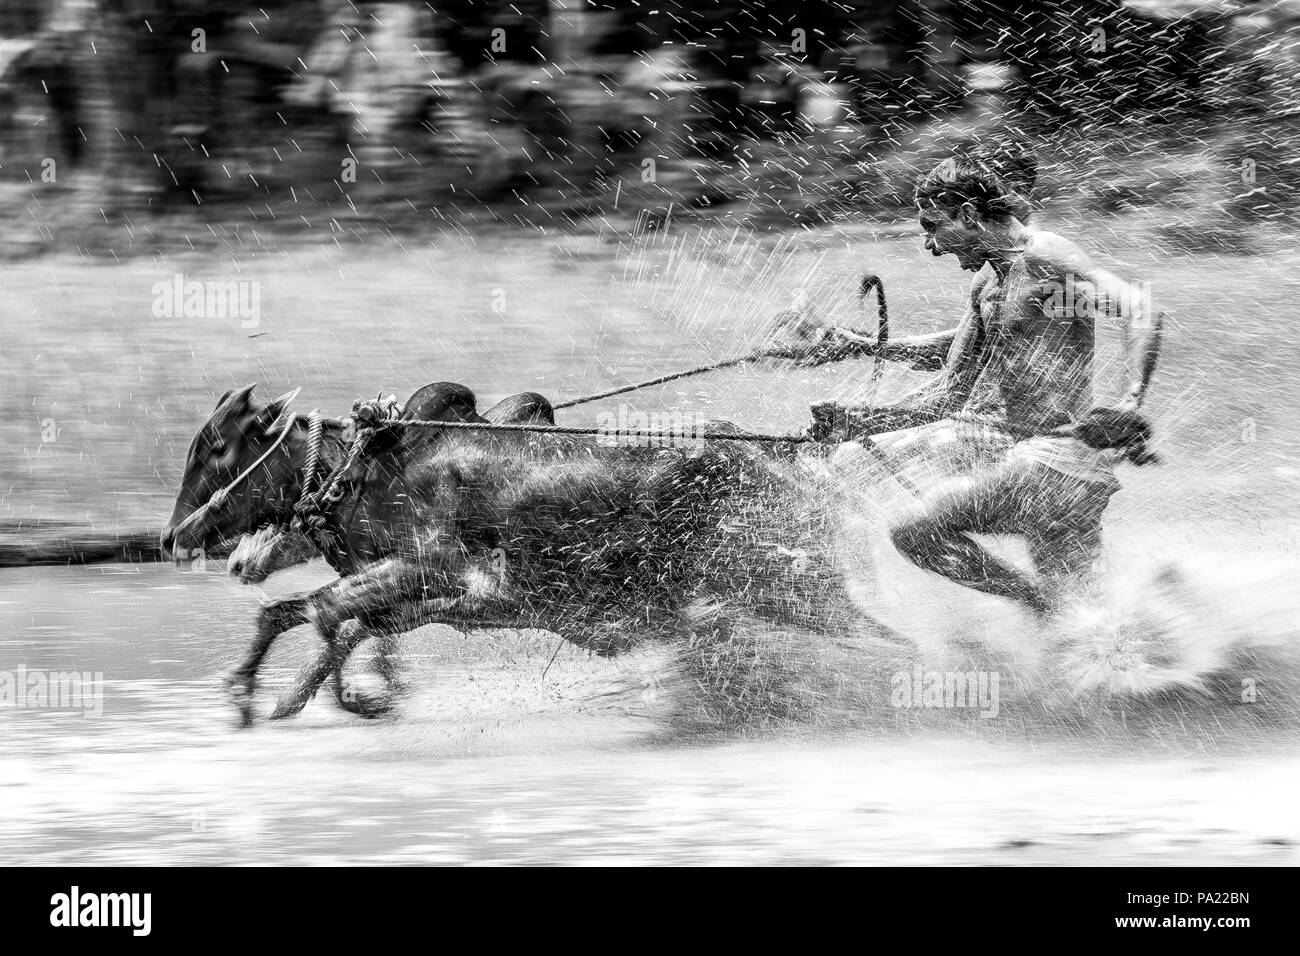 Maramadi, the traditional bull racing event, held every year in the post-harvest season. Stock Photo